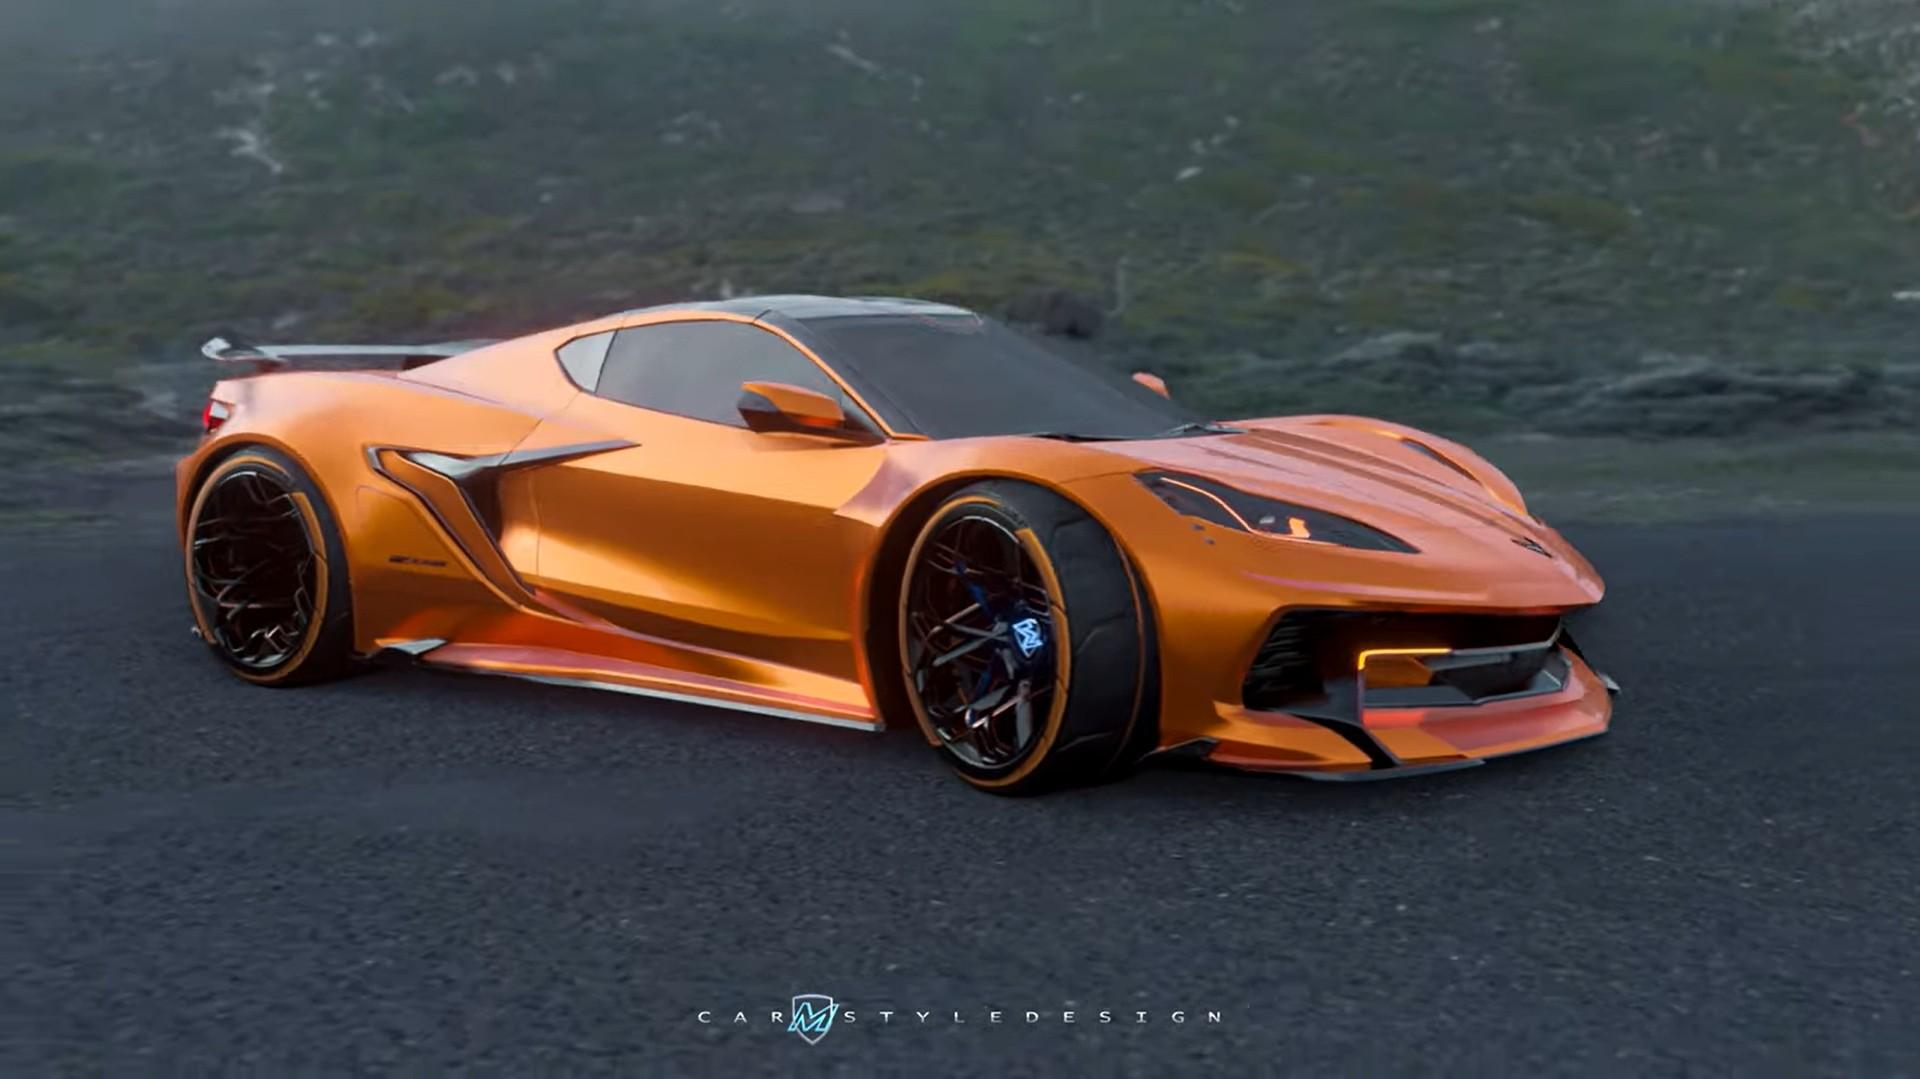 Digital Widebody Chevy Corvette Z06 Shows Its Extreme